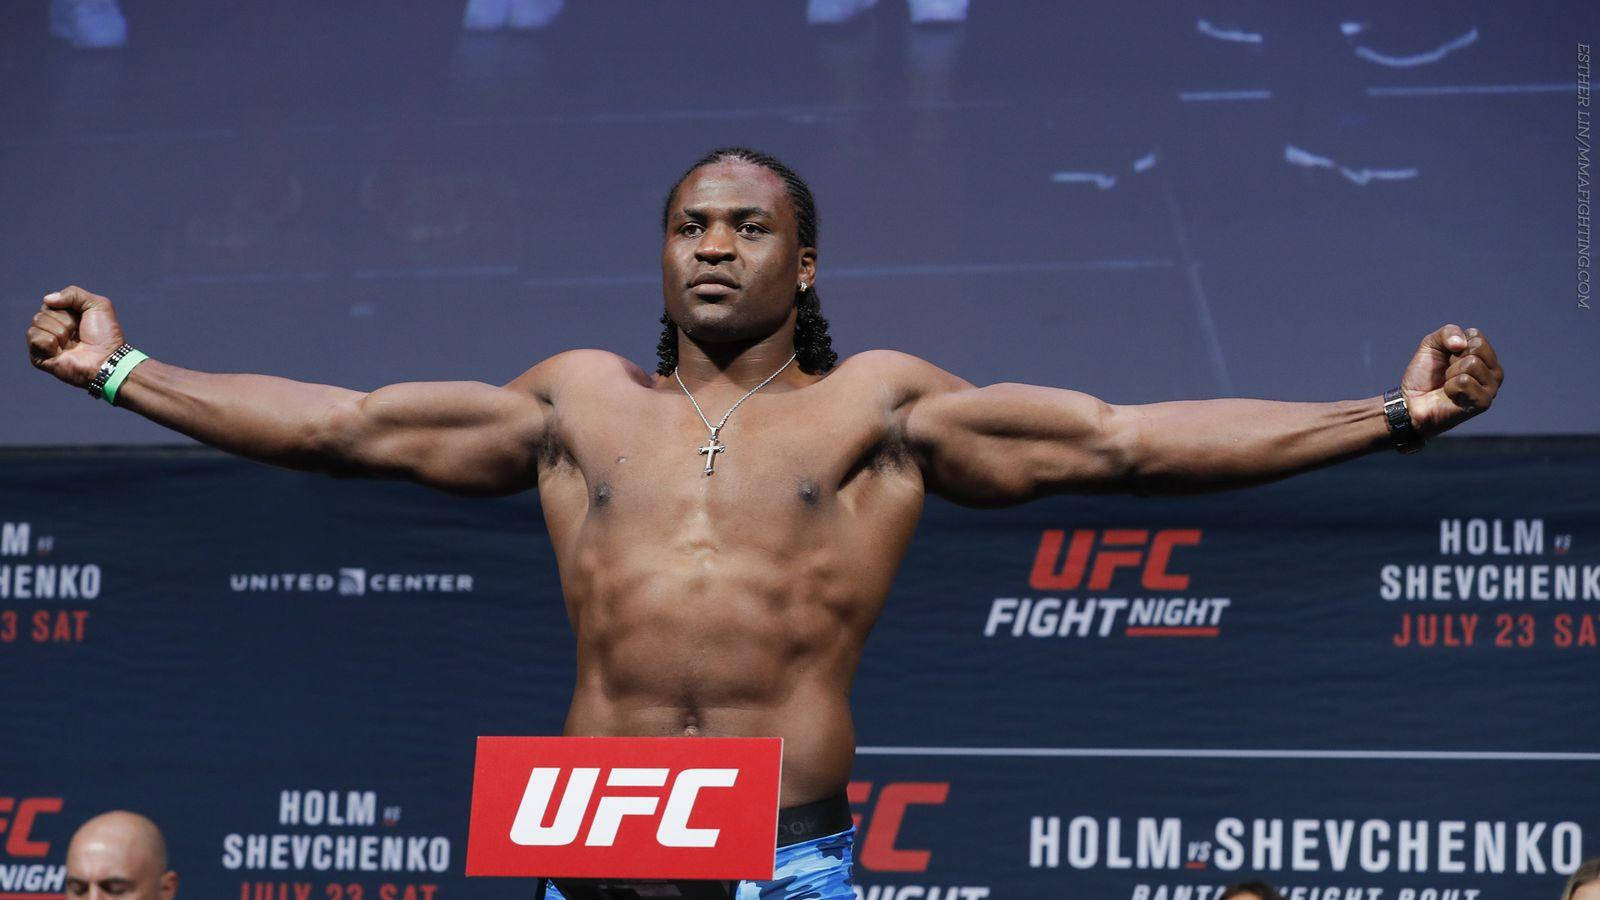 "Francis Ngannou Exhibiting His Powerful Physique" Wallpaper